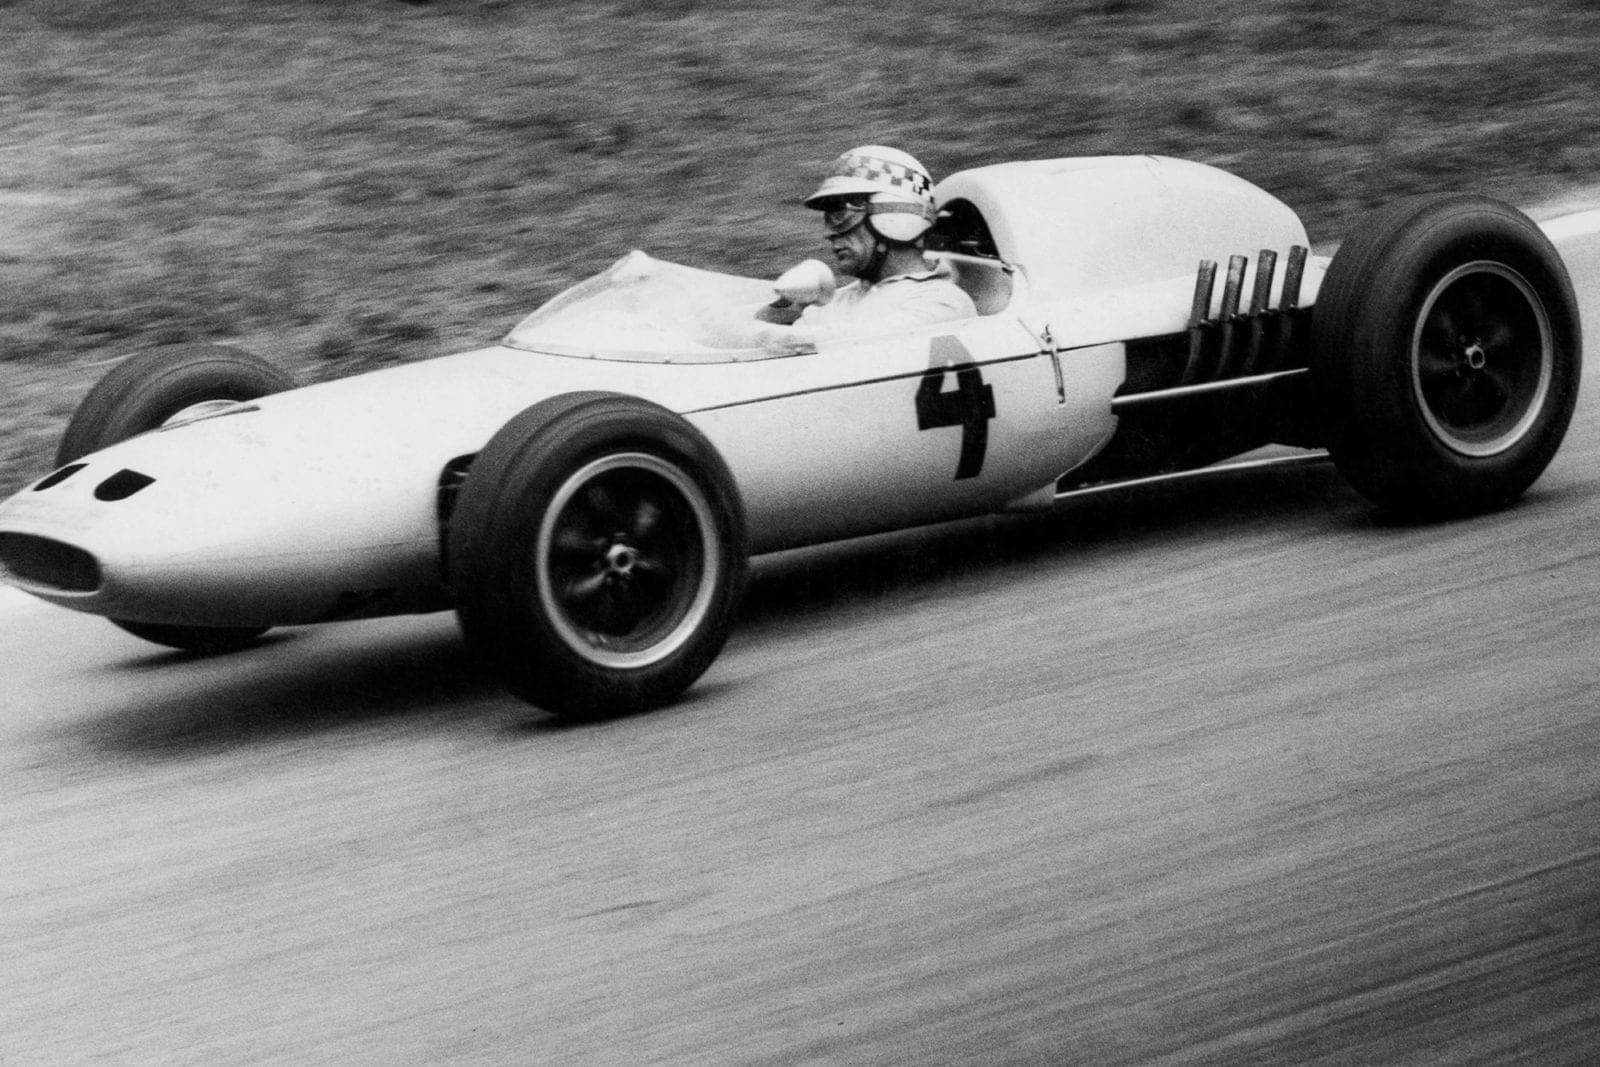 Innes Ireland in a Lotus 24 at the 1962 Crystal Palace Trophy